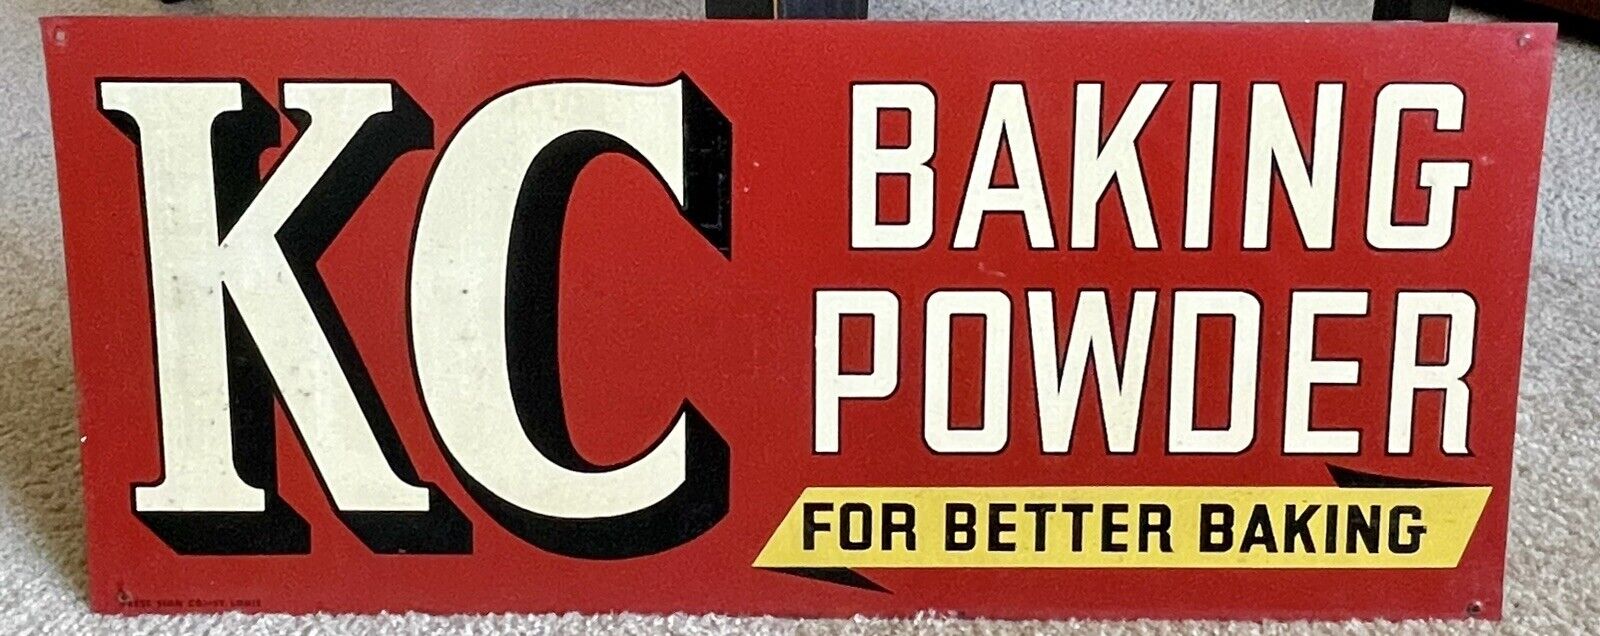 Vintage KC Baking Powder Advertising Sign Two-Sided Good Condition Displays Well